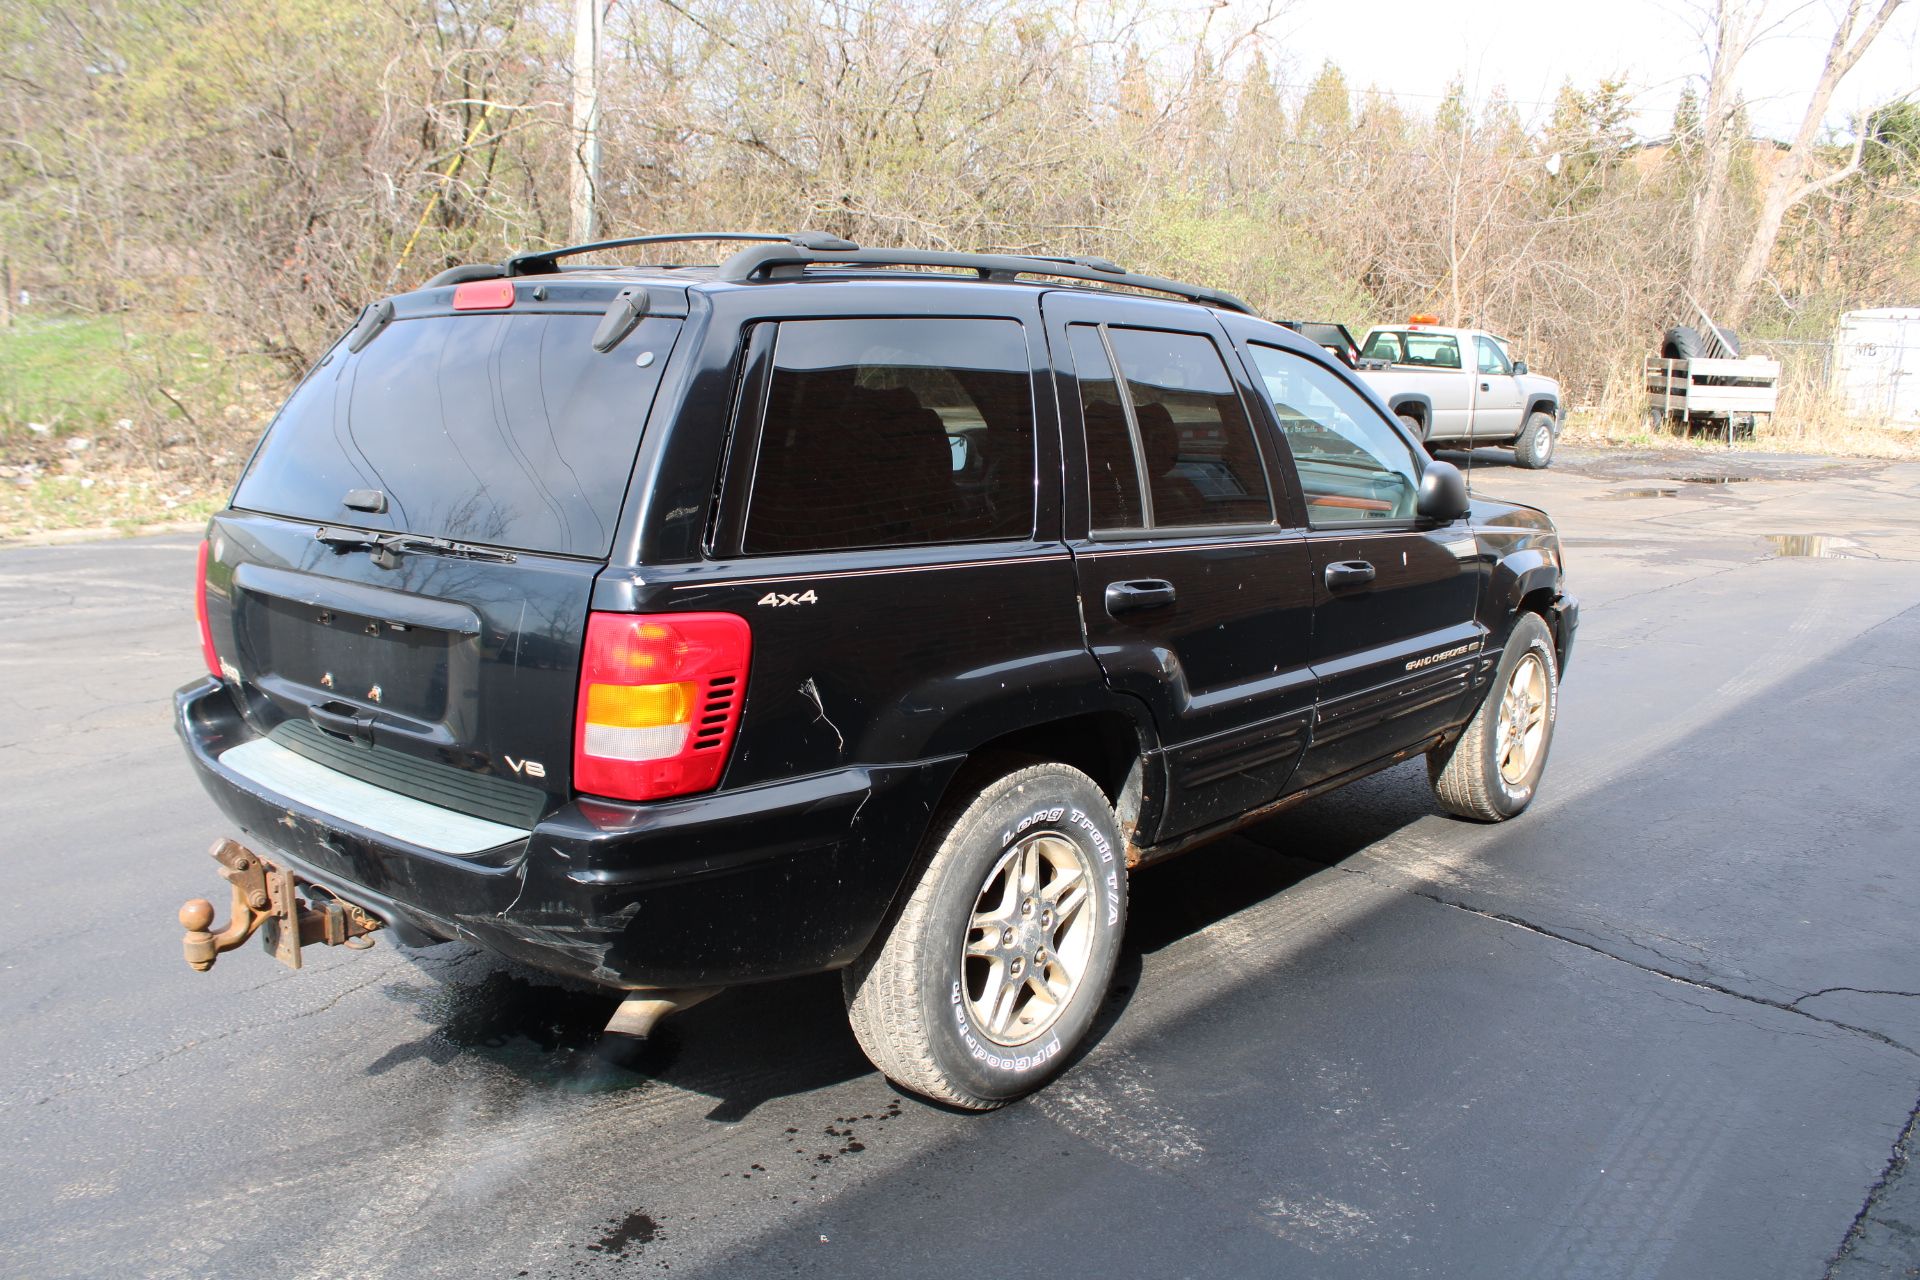 1999 JEEP GRAND CHEROKEE LIMITED, 4WD, 4.7L V-8,VIN 1J4GW68N5XC579232, 107,352 MILES ON ODOMETER, - Image 3 of 9